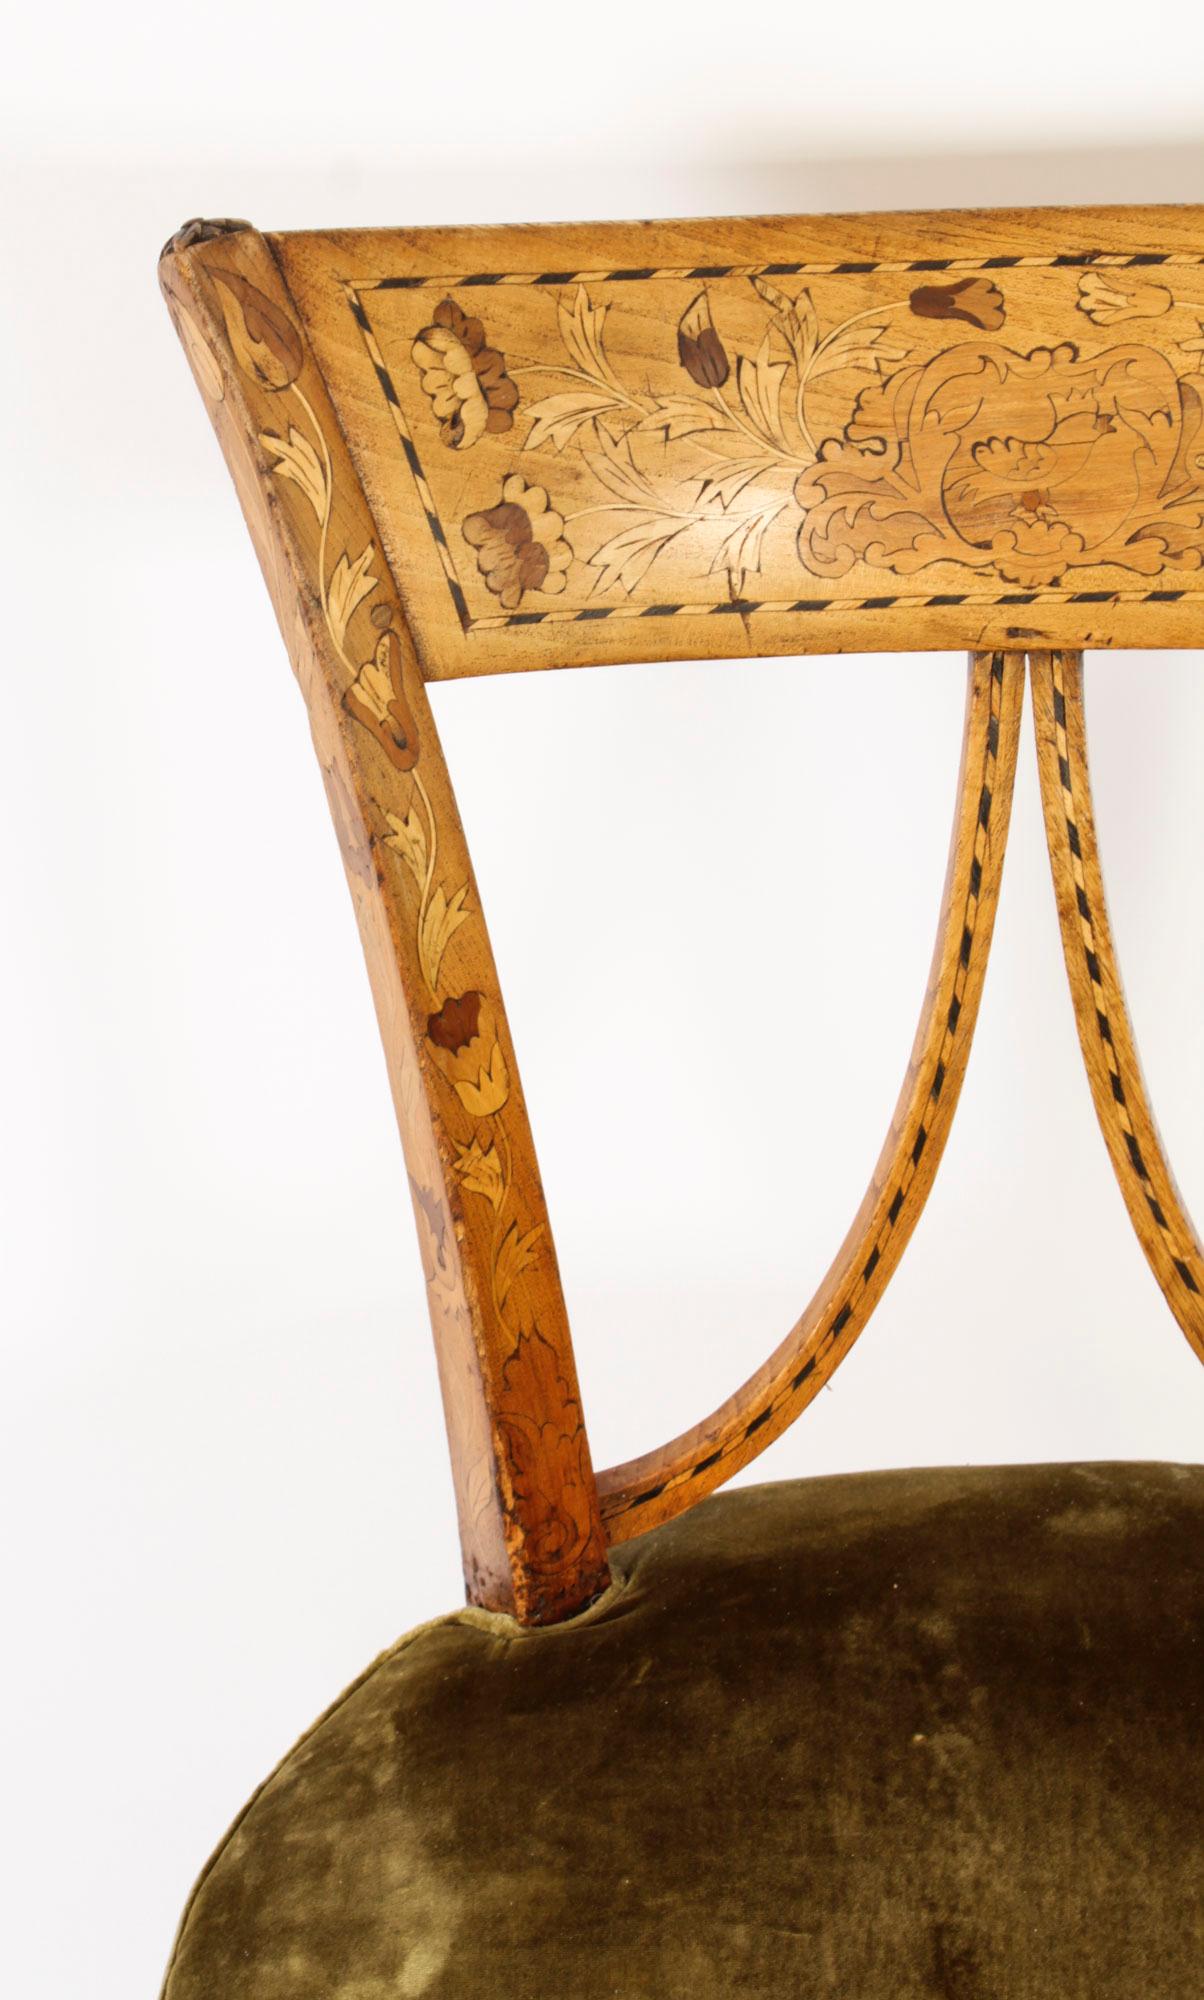 Antique Dutch Satinwood Marquetry Desk Chair 19th Century In Good Condition For Sale In London, GB